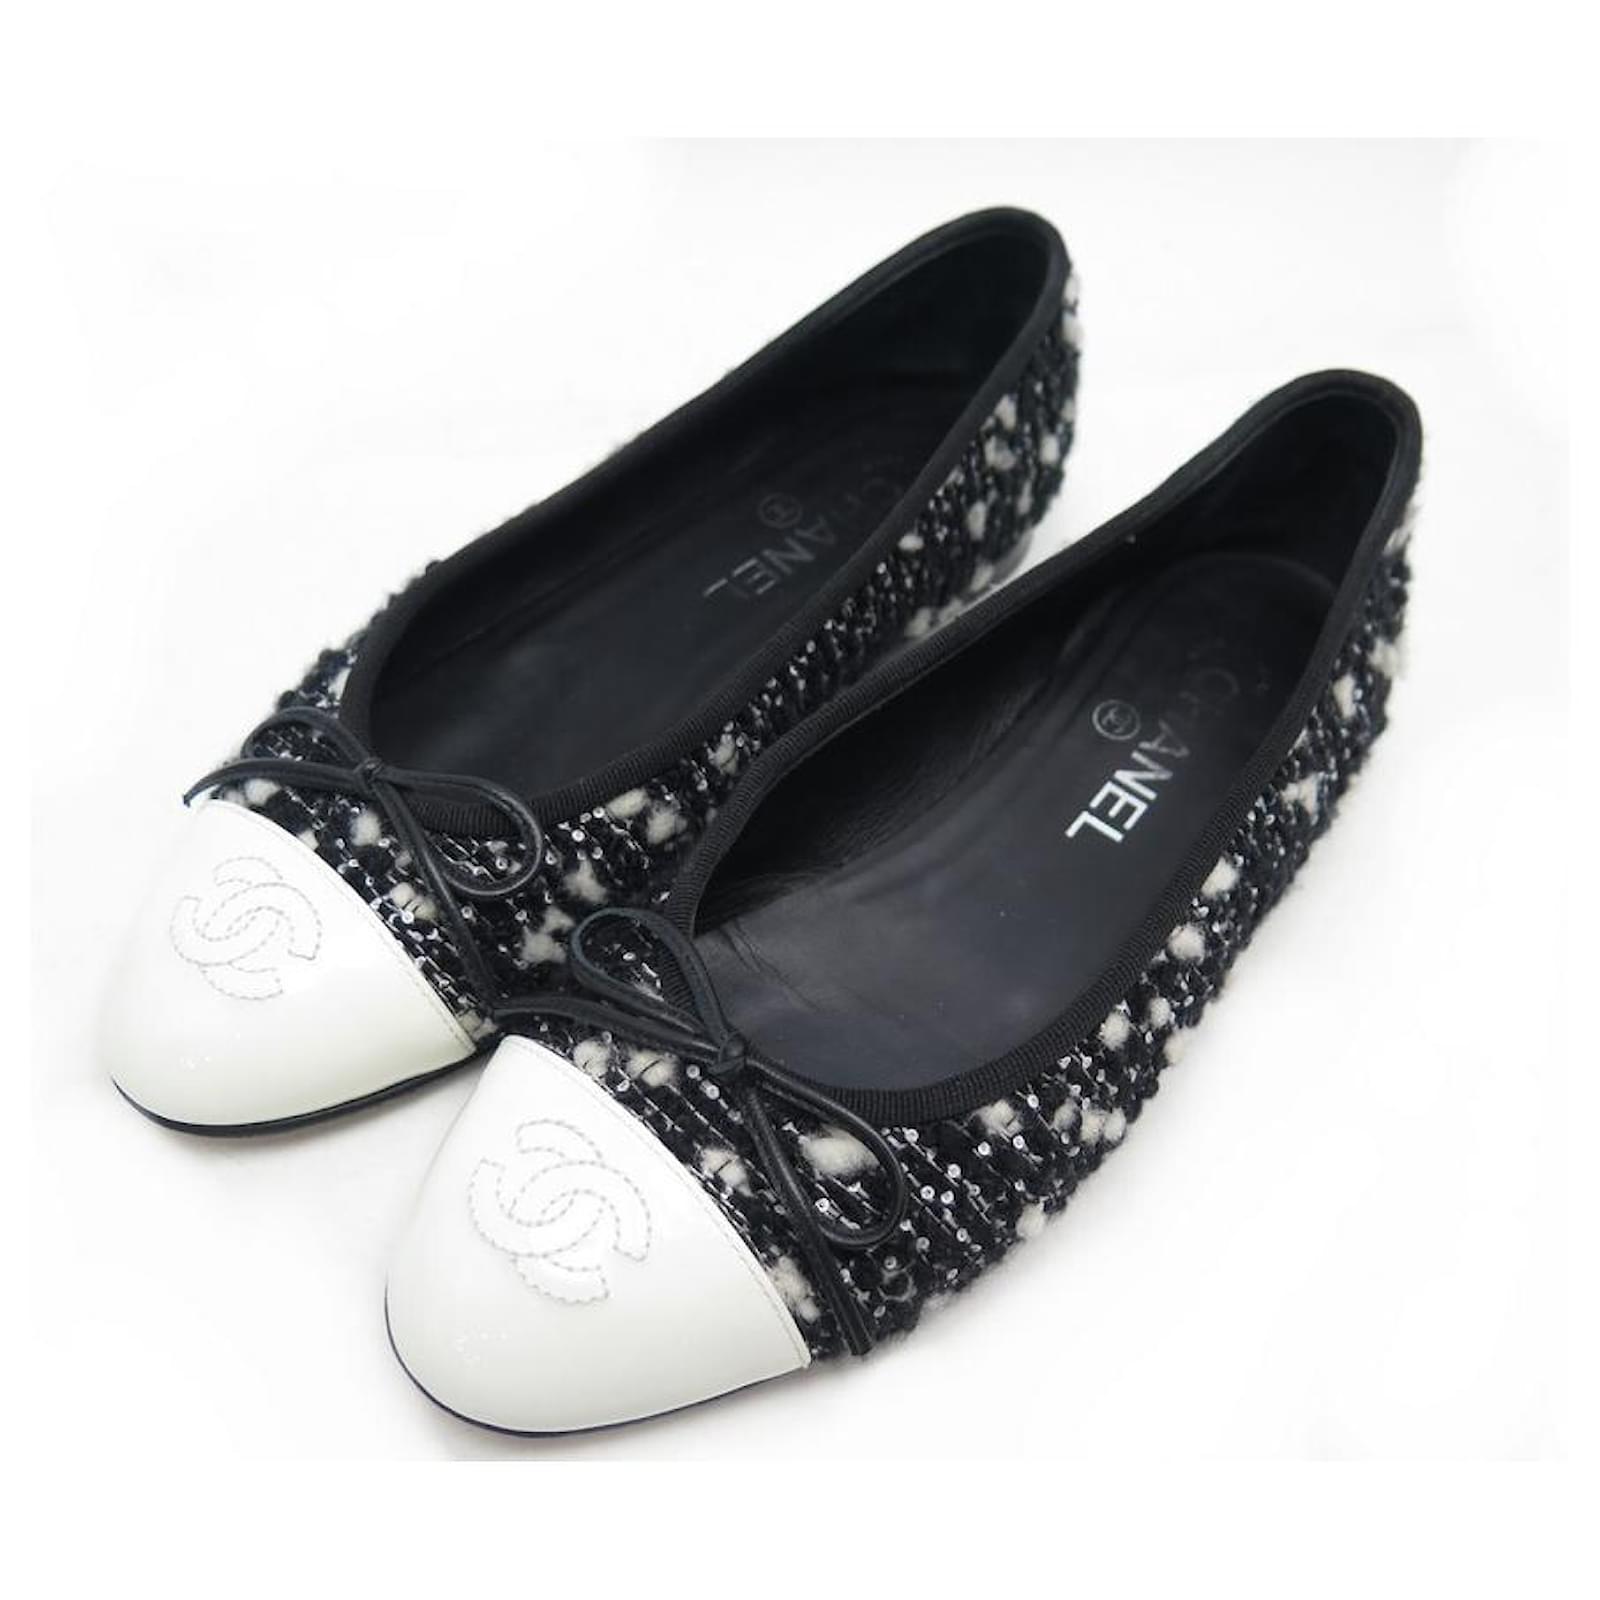 CHANEL G SHOES02819 37.5 BLACK AND WHITE TWEED BALLERINAS FLAT SHOES